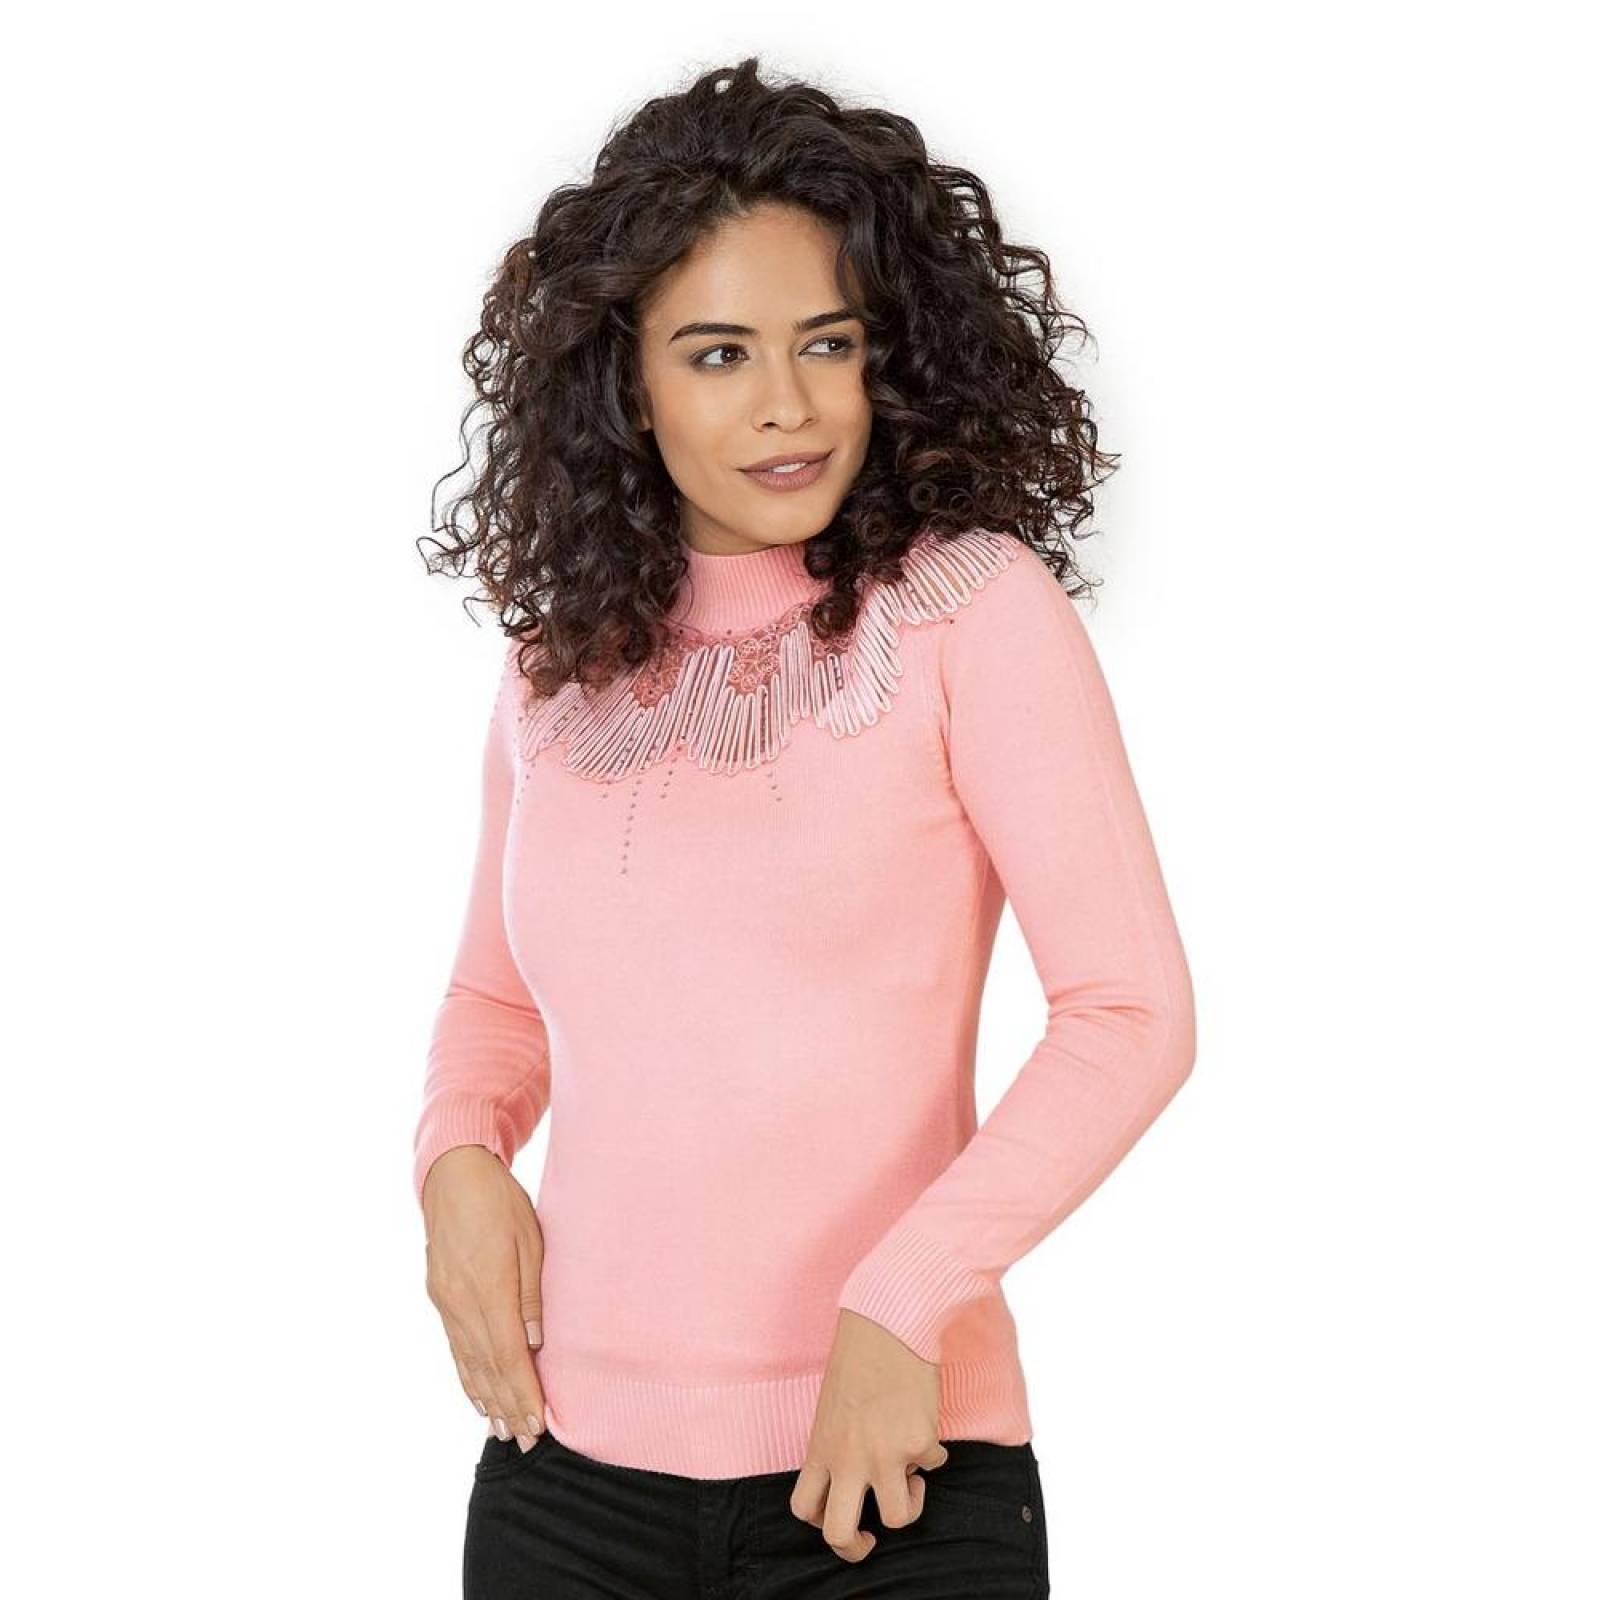 Sweater Capricho Mujer Rosa Spandex Cns-122 